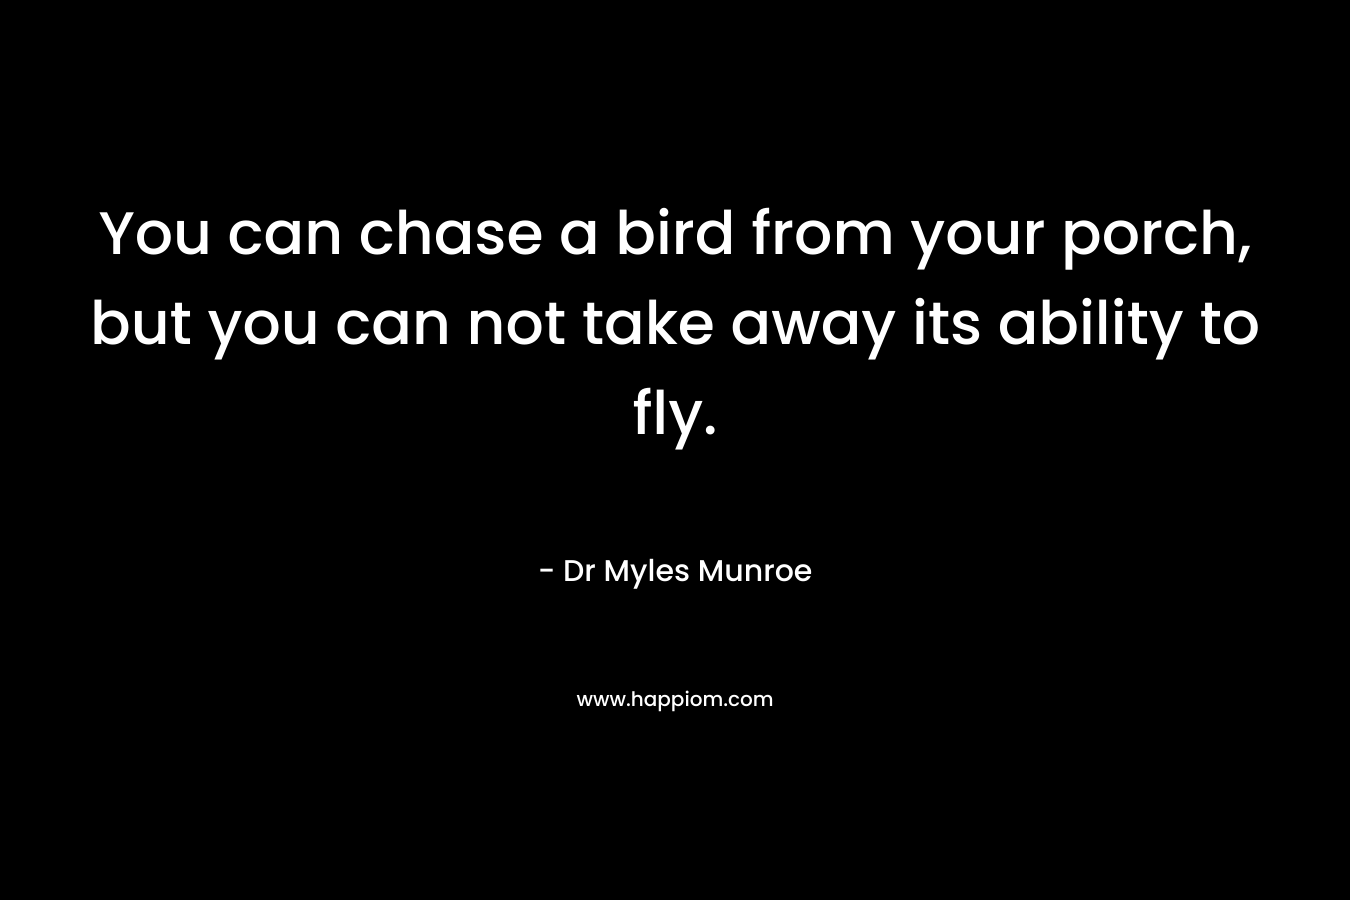 You can chase a bird from your porch, but you can not take away its ability to fly.